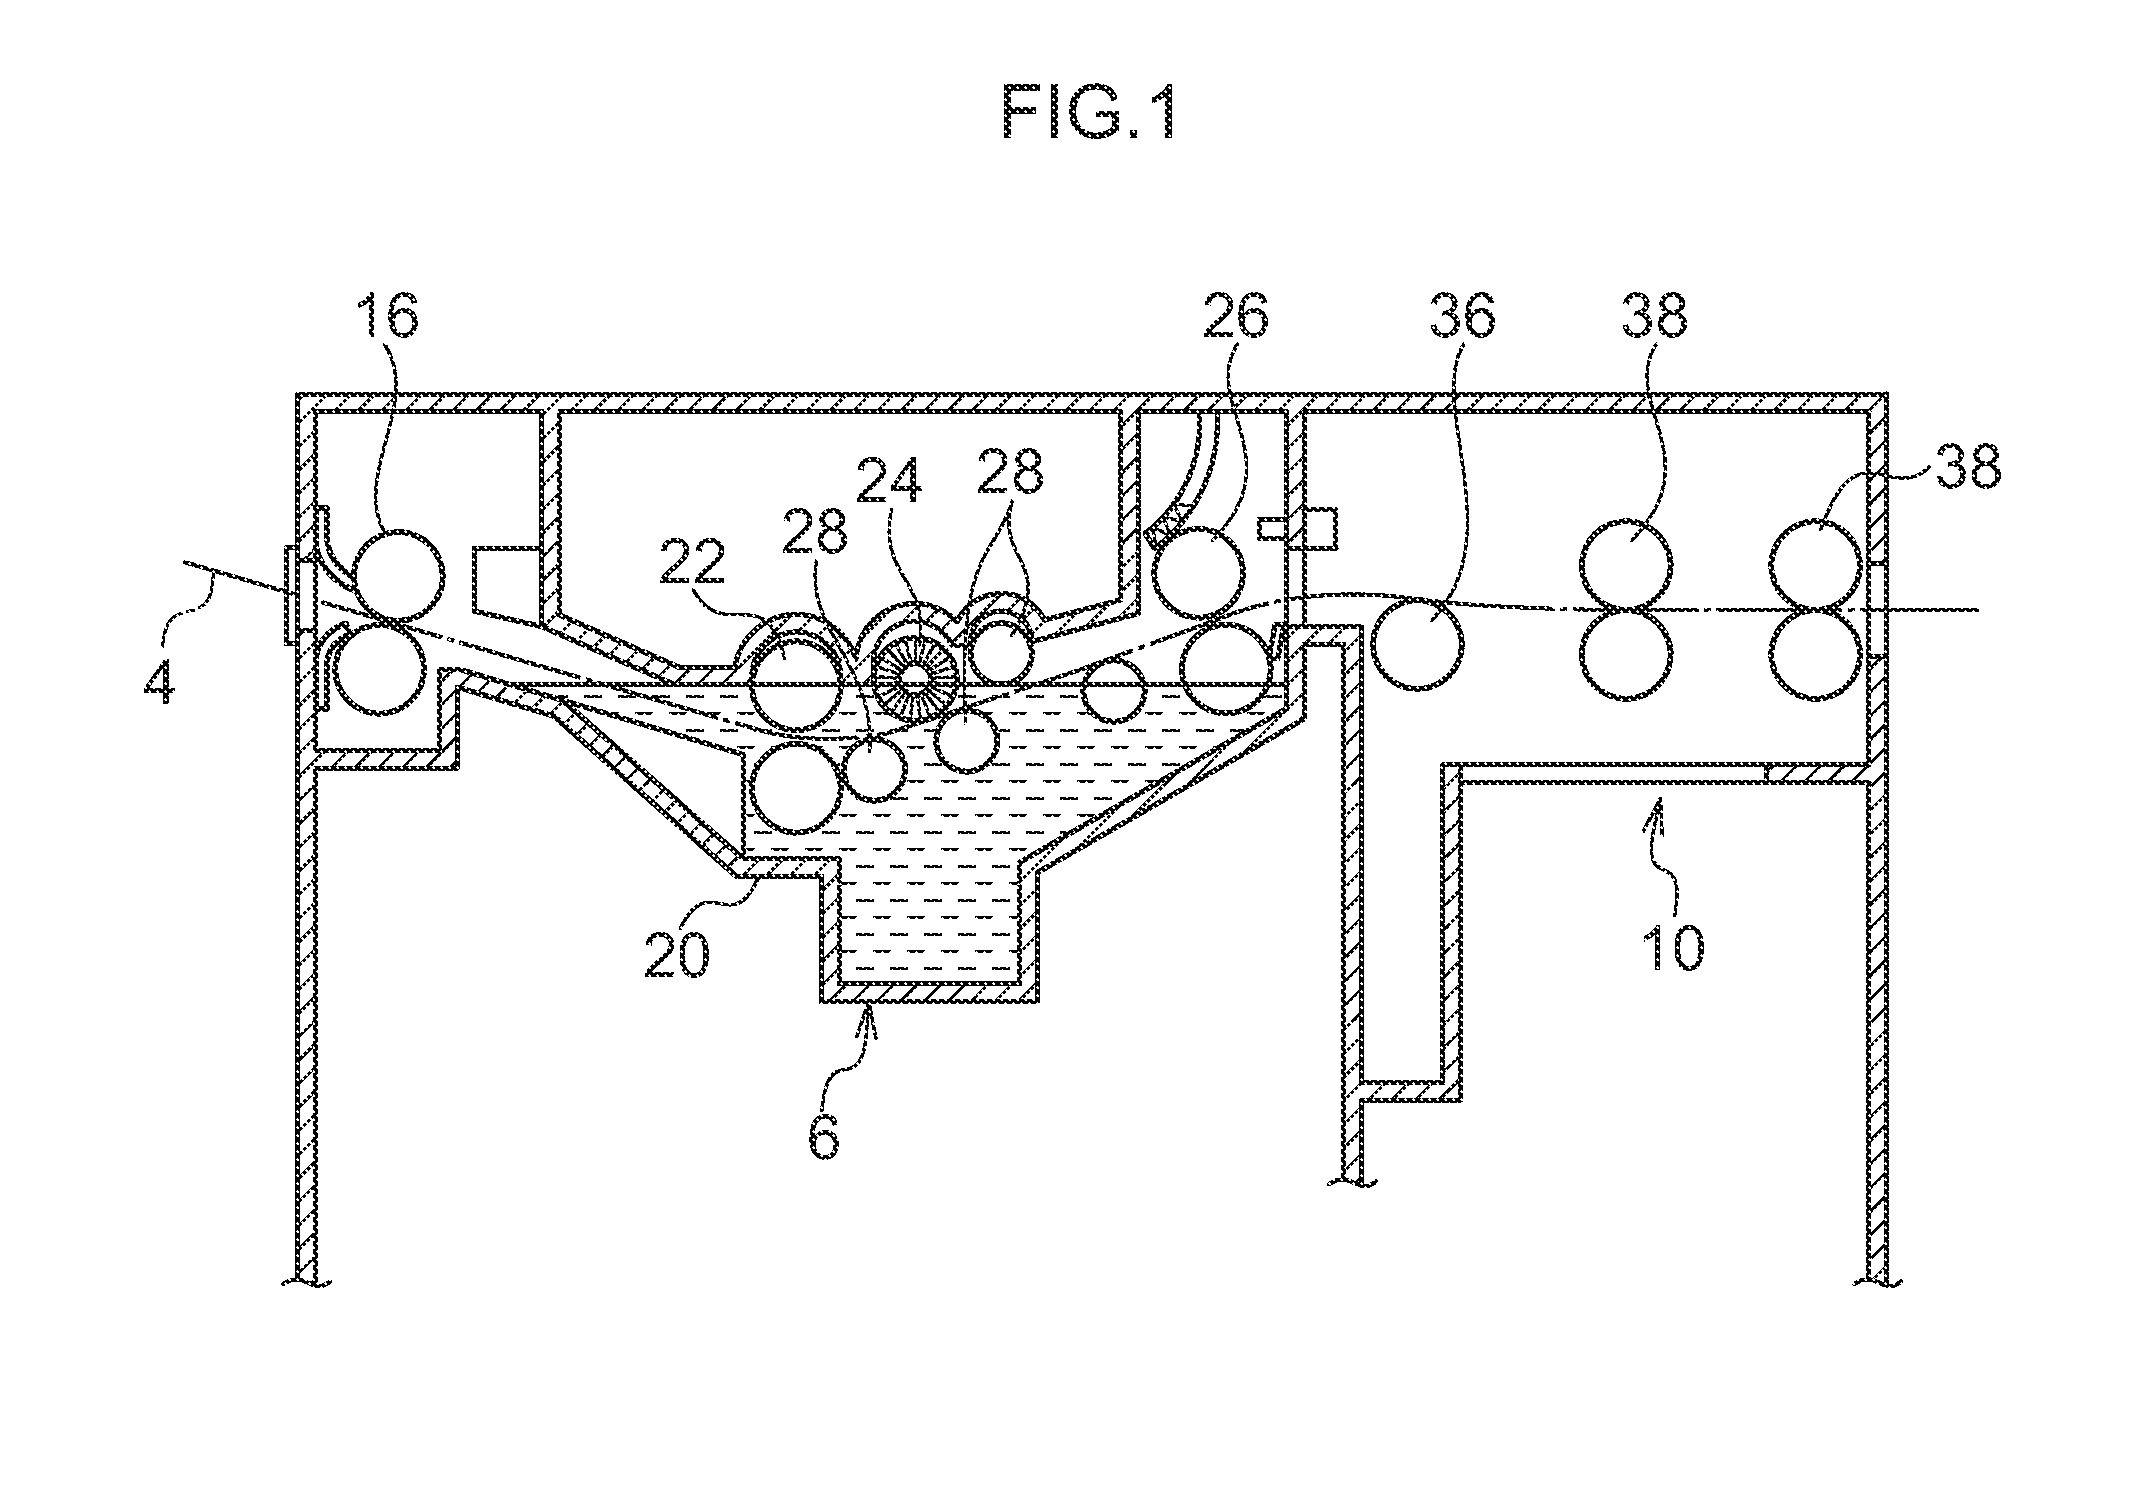 Method for producing a planographic printing plate